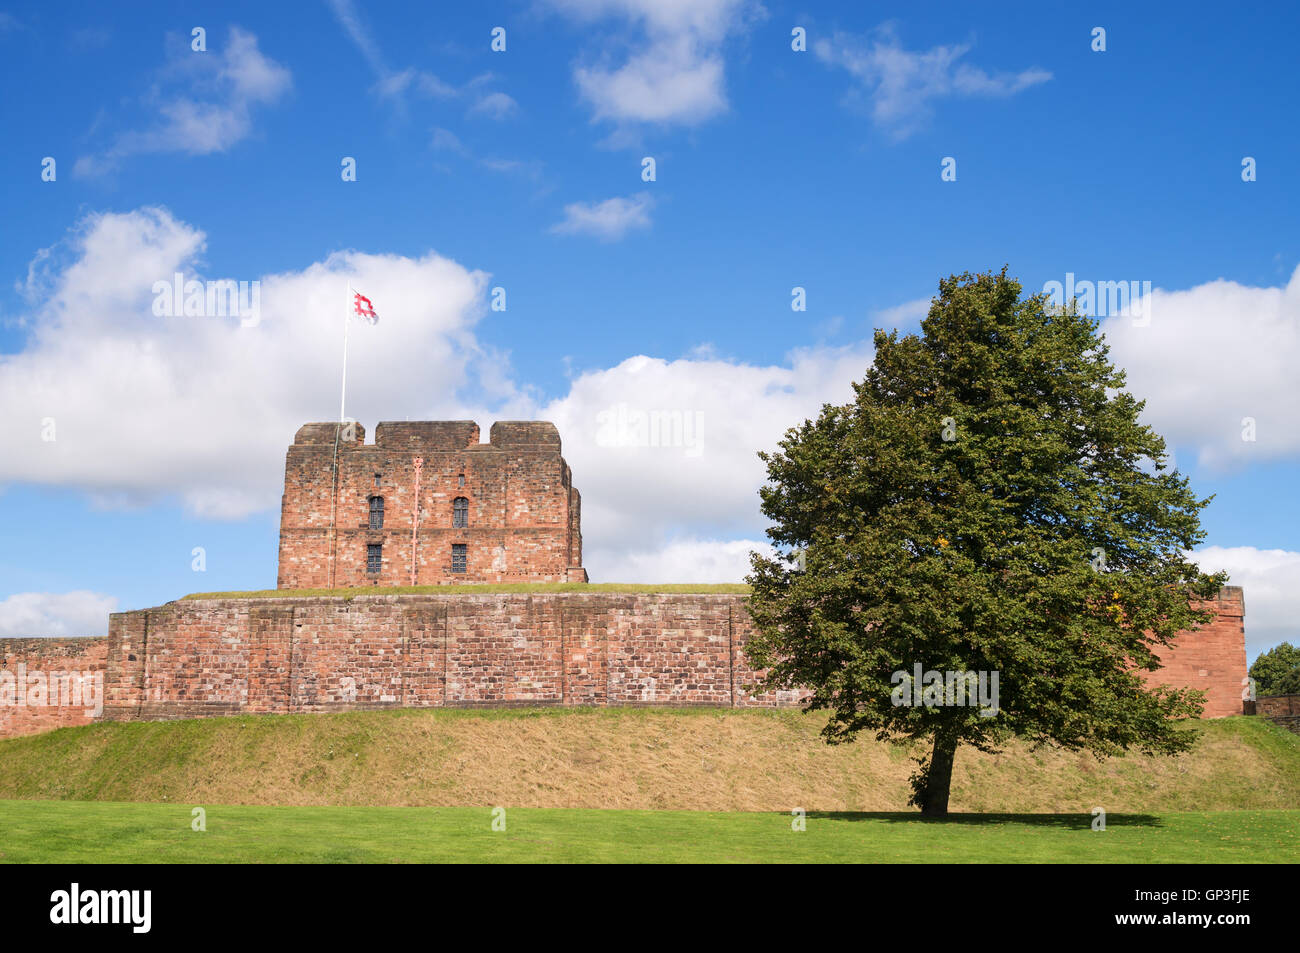 Carlisle castle keep and outer wall, with English Heritage flag flying, Cumbria, England, UK Stock Photo